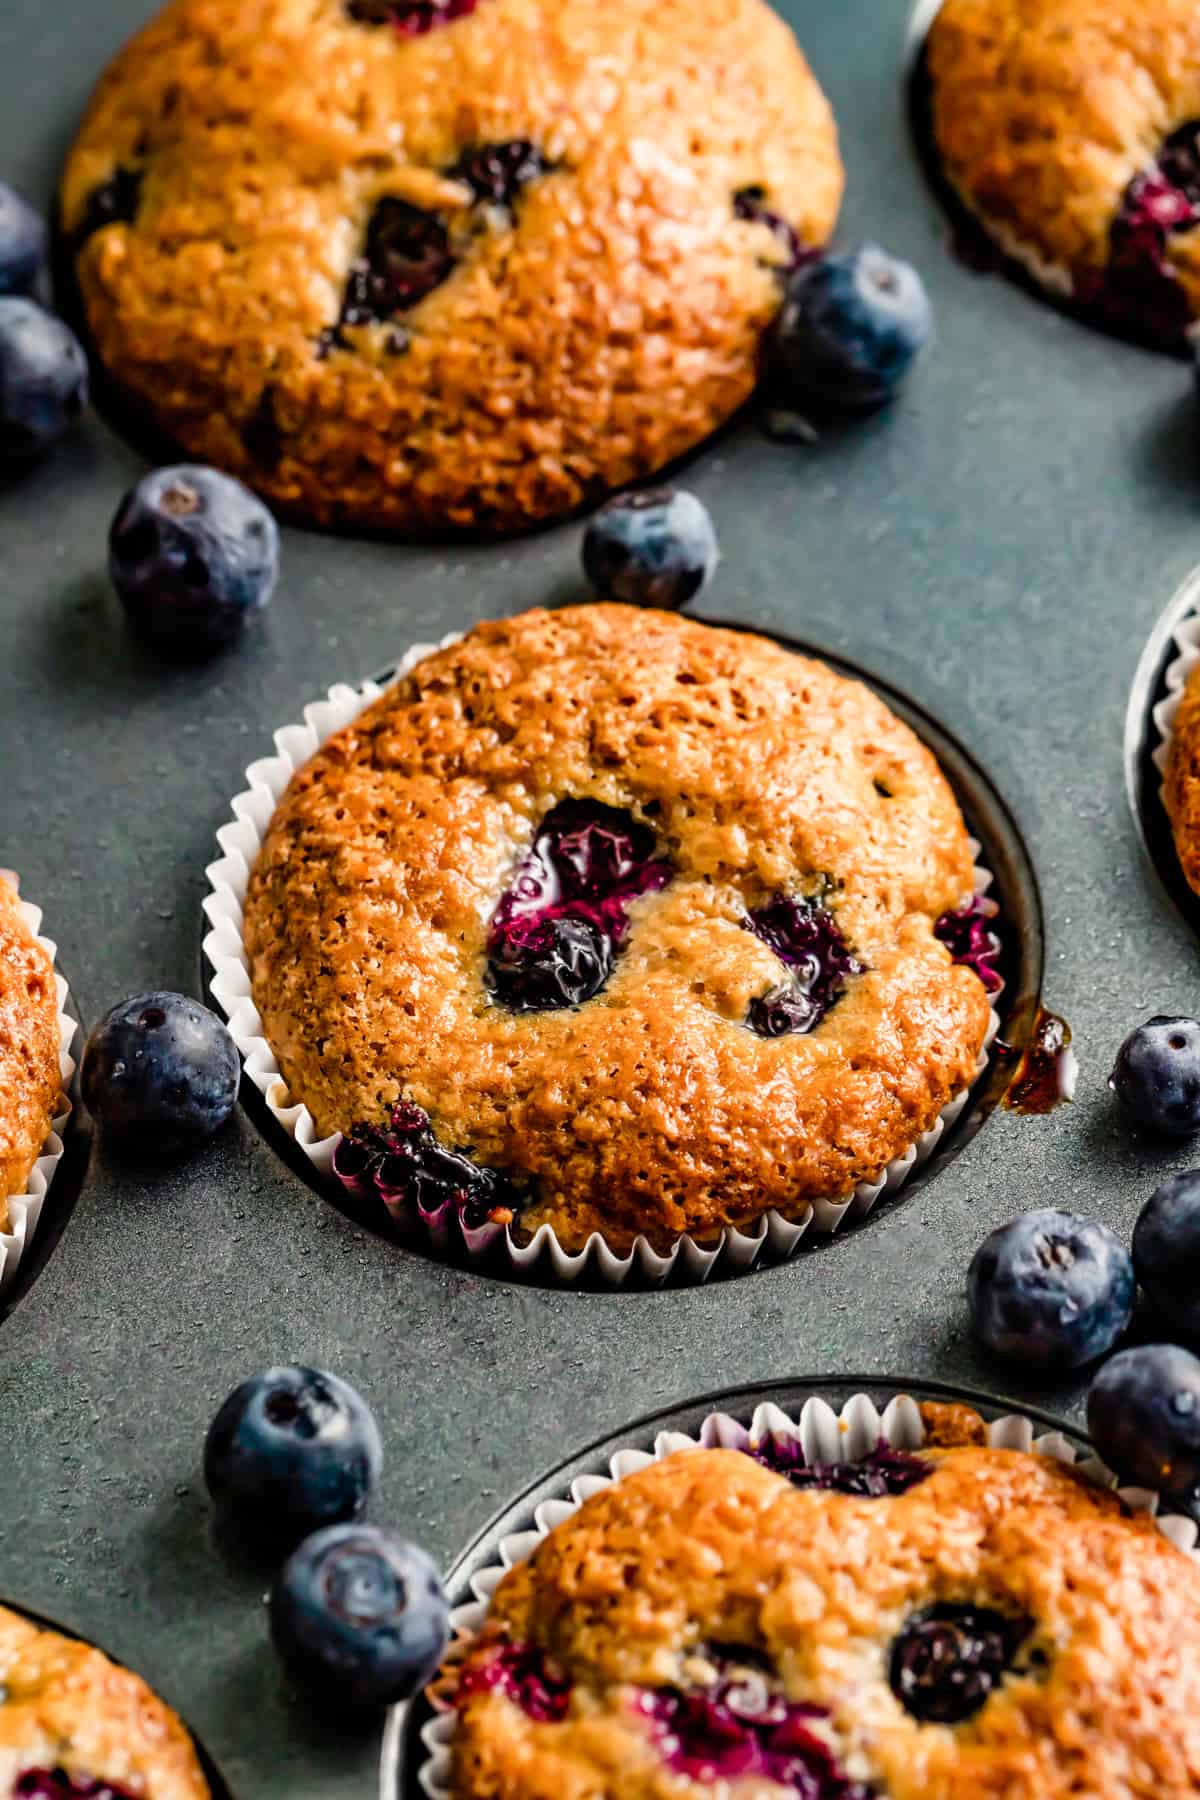 Blueberry lemon muffins baked in a muffin pan with fresh blueberries scattered around.